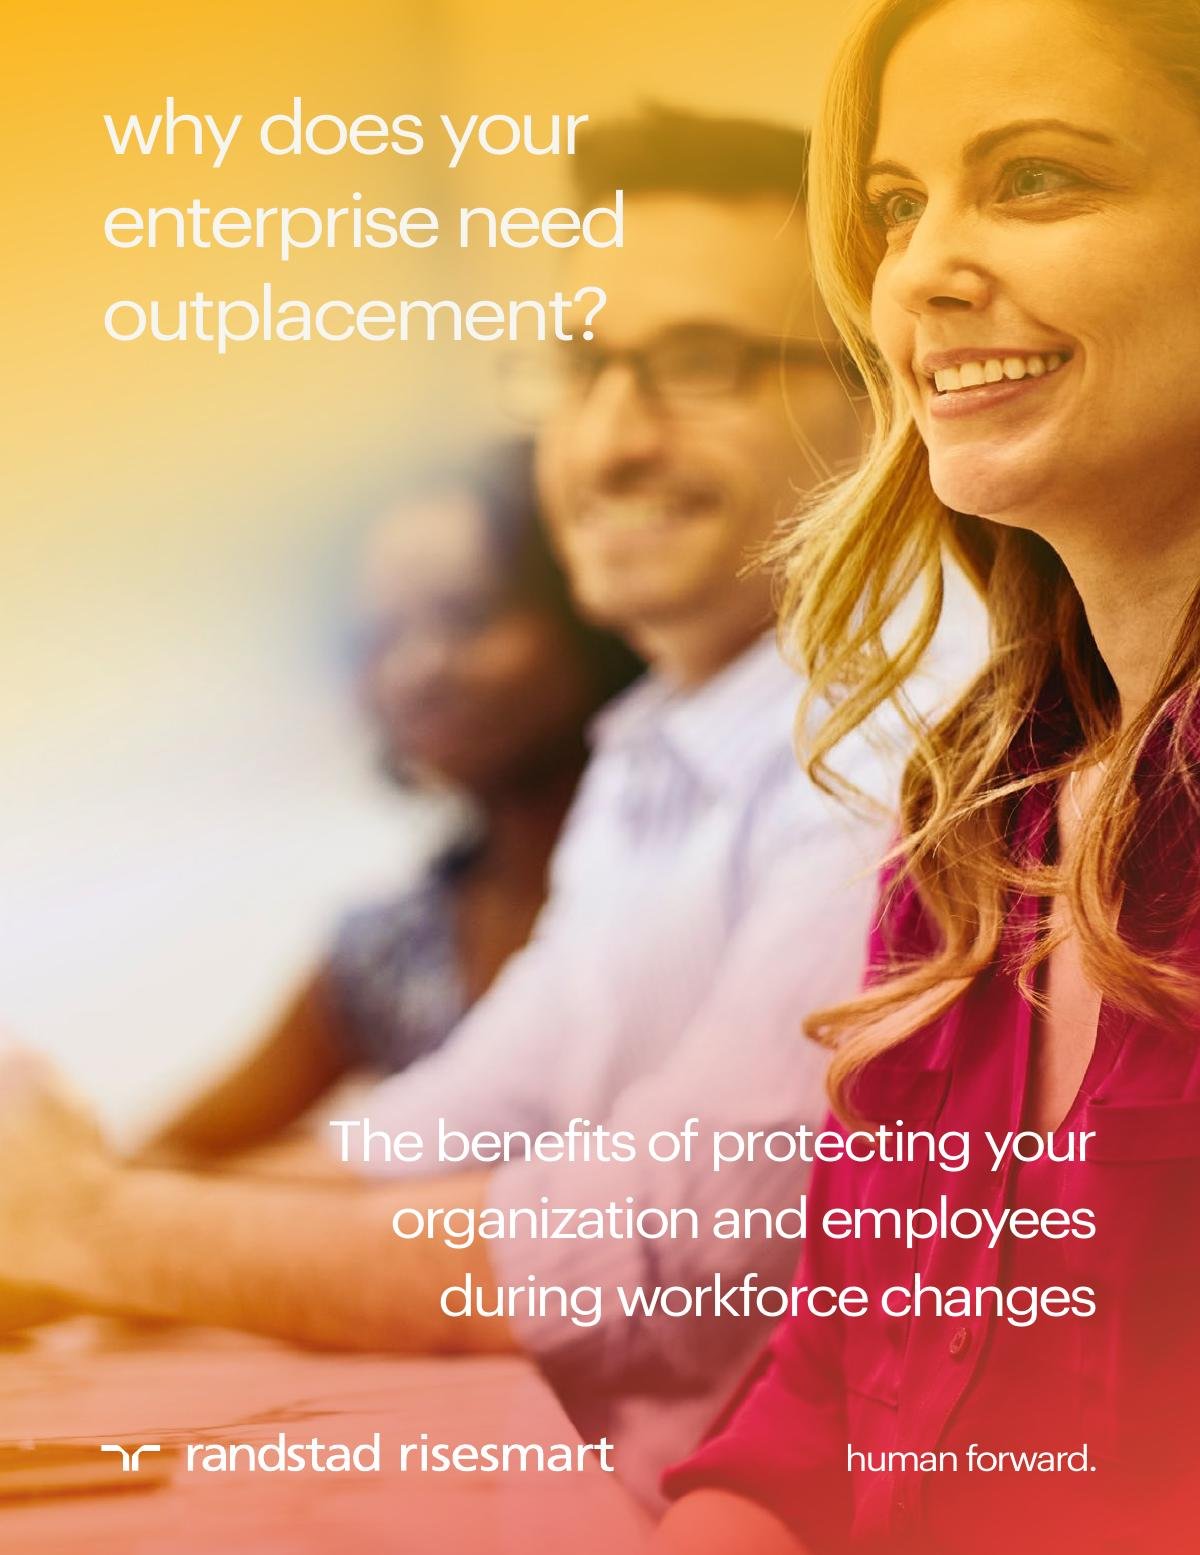 Why Does Your Organization Need Outplacement? Protect Your Organization and Employees